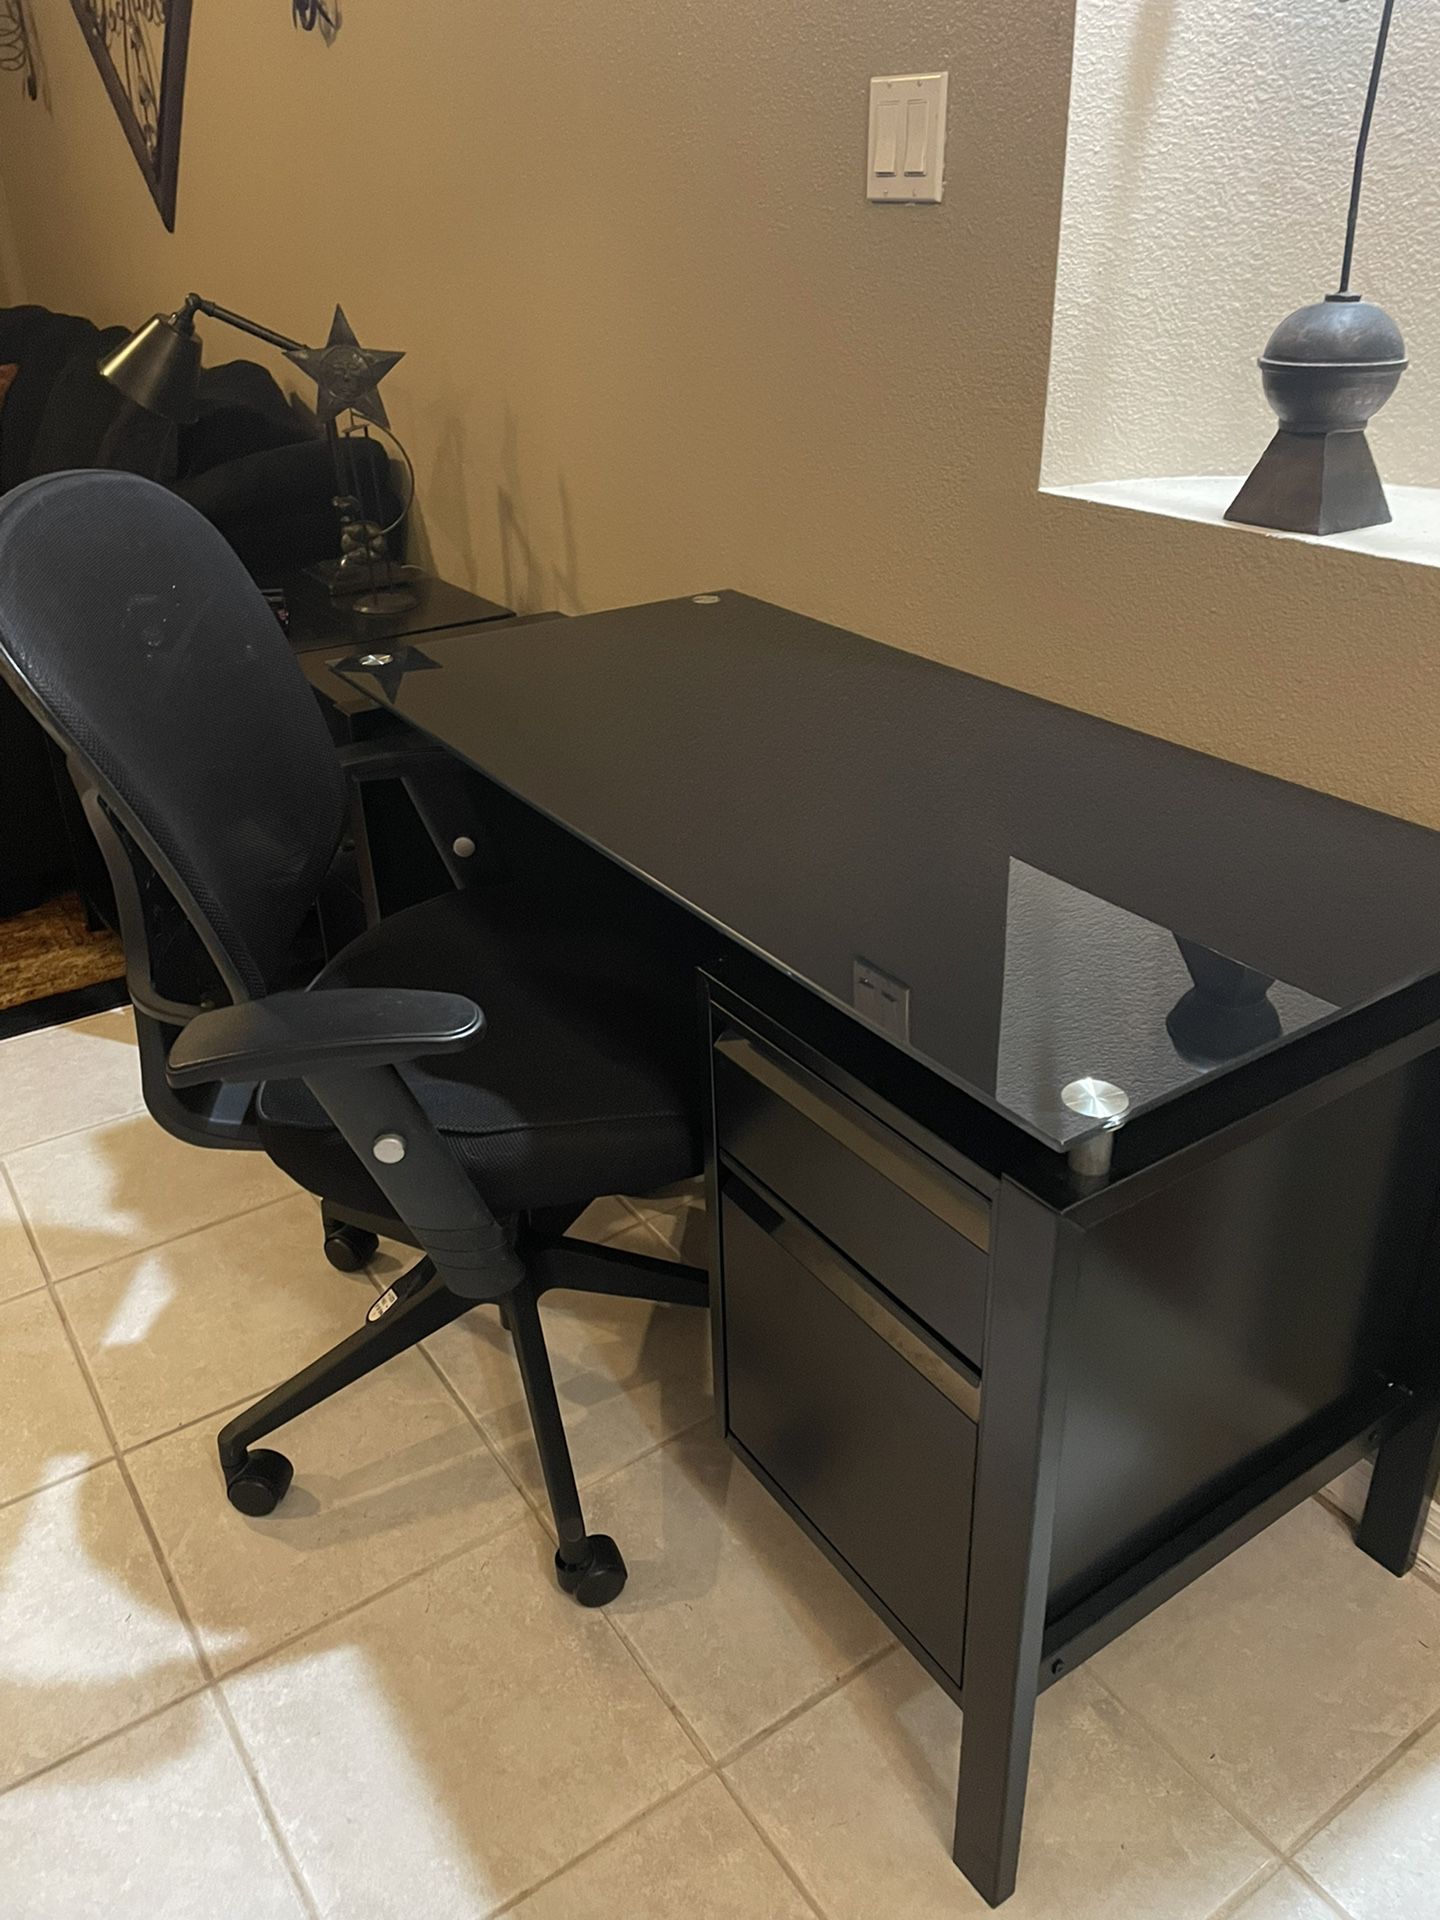 Black Glass Top Desk With Drawer And File Drawer And Chair And File Cabinet With Lock.. Less Than 6 Mos. Old!